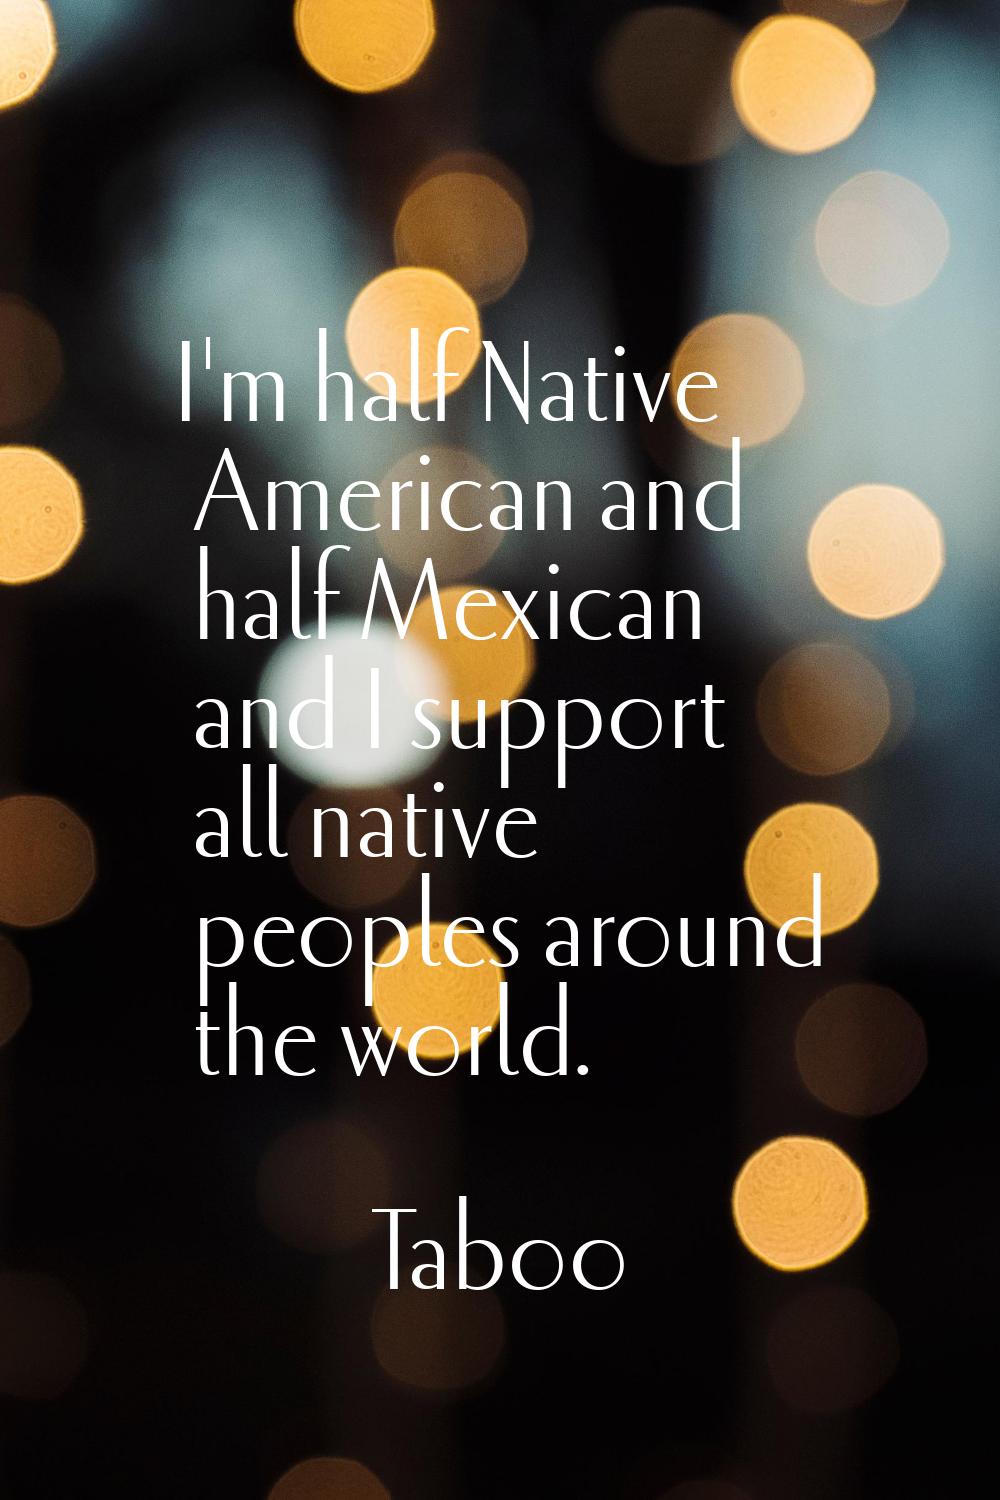 I'm half Native American and half Mexican and I support all native peoples around the world.